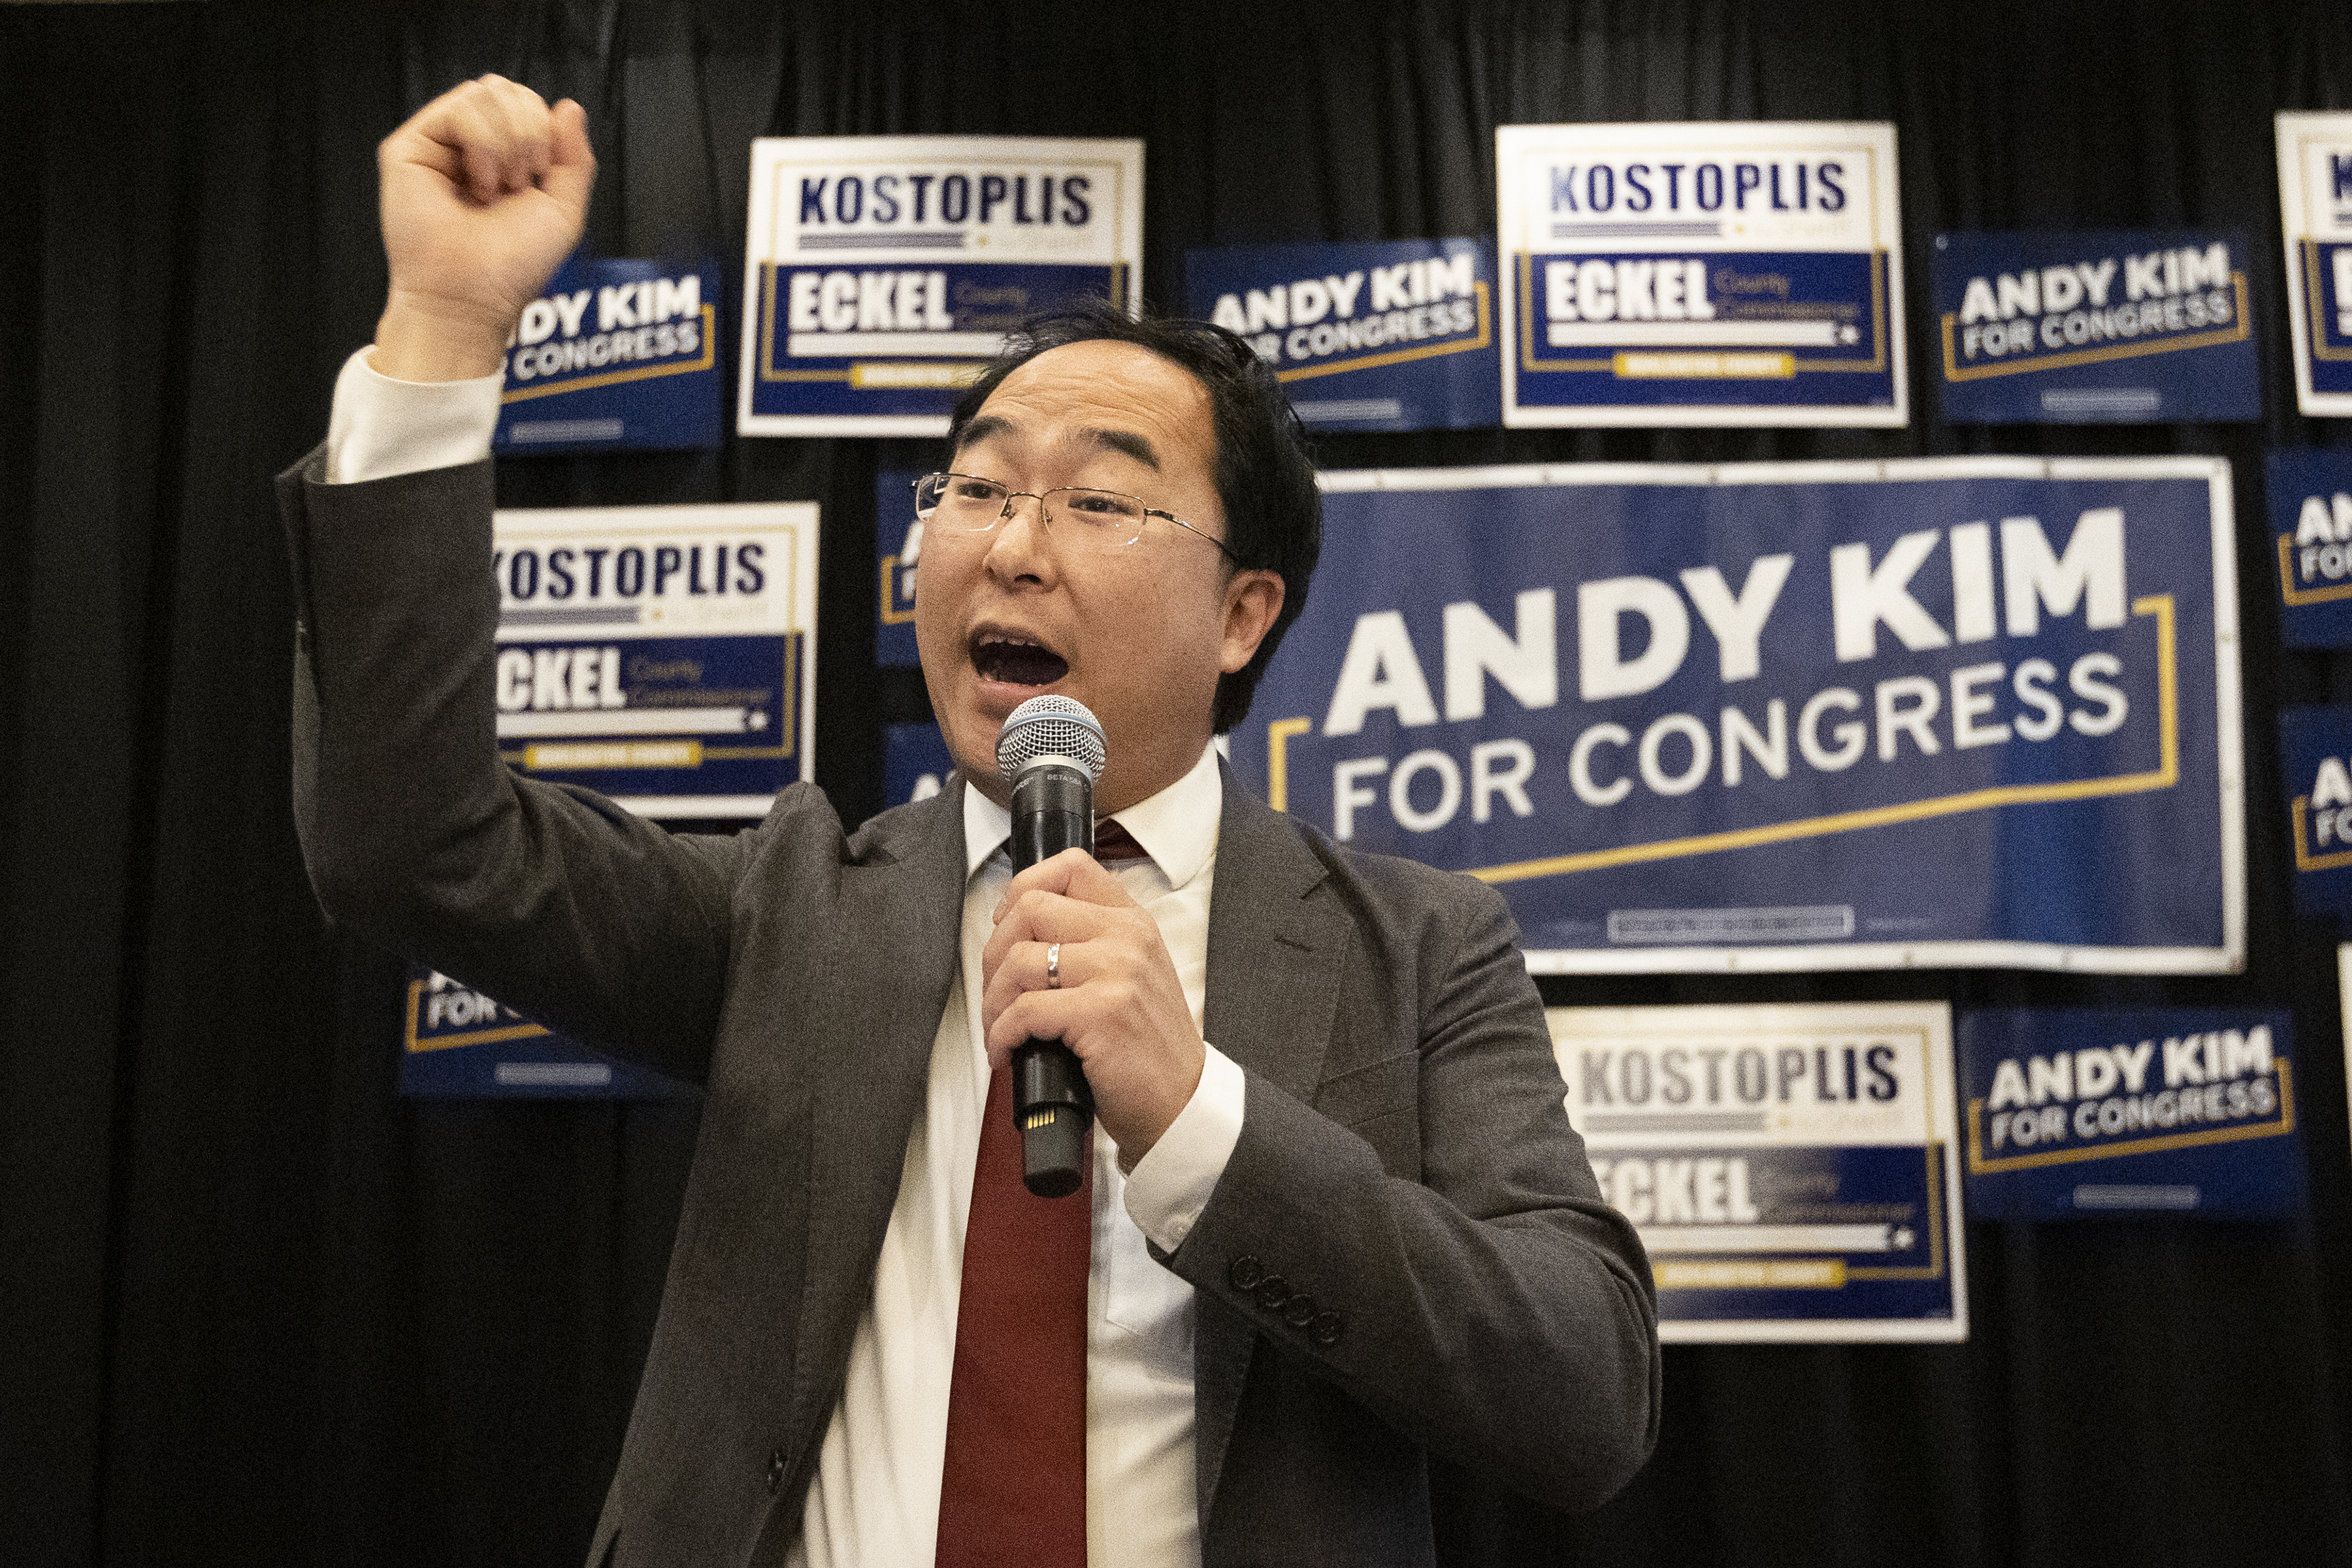 Goneryl Forskelle Dekorative Reps. Andy Kim, Jeff Van Drew, and Donald Norcross win reelection to Congress  in South Jersey